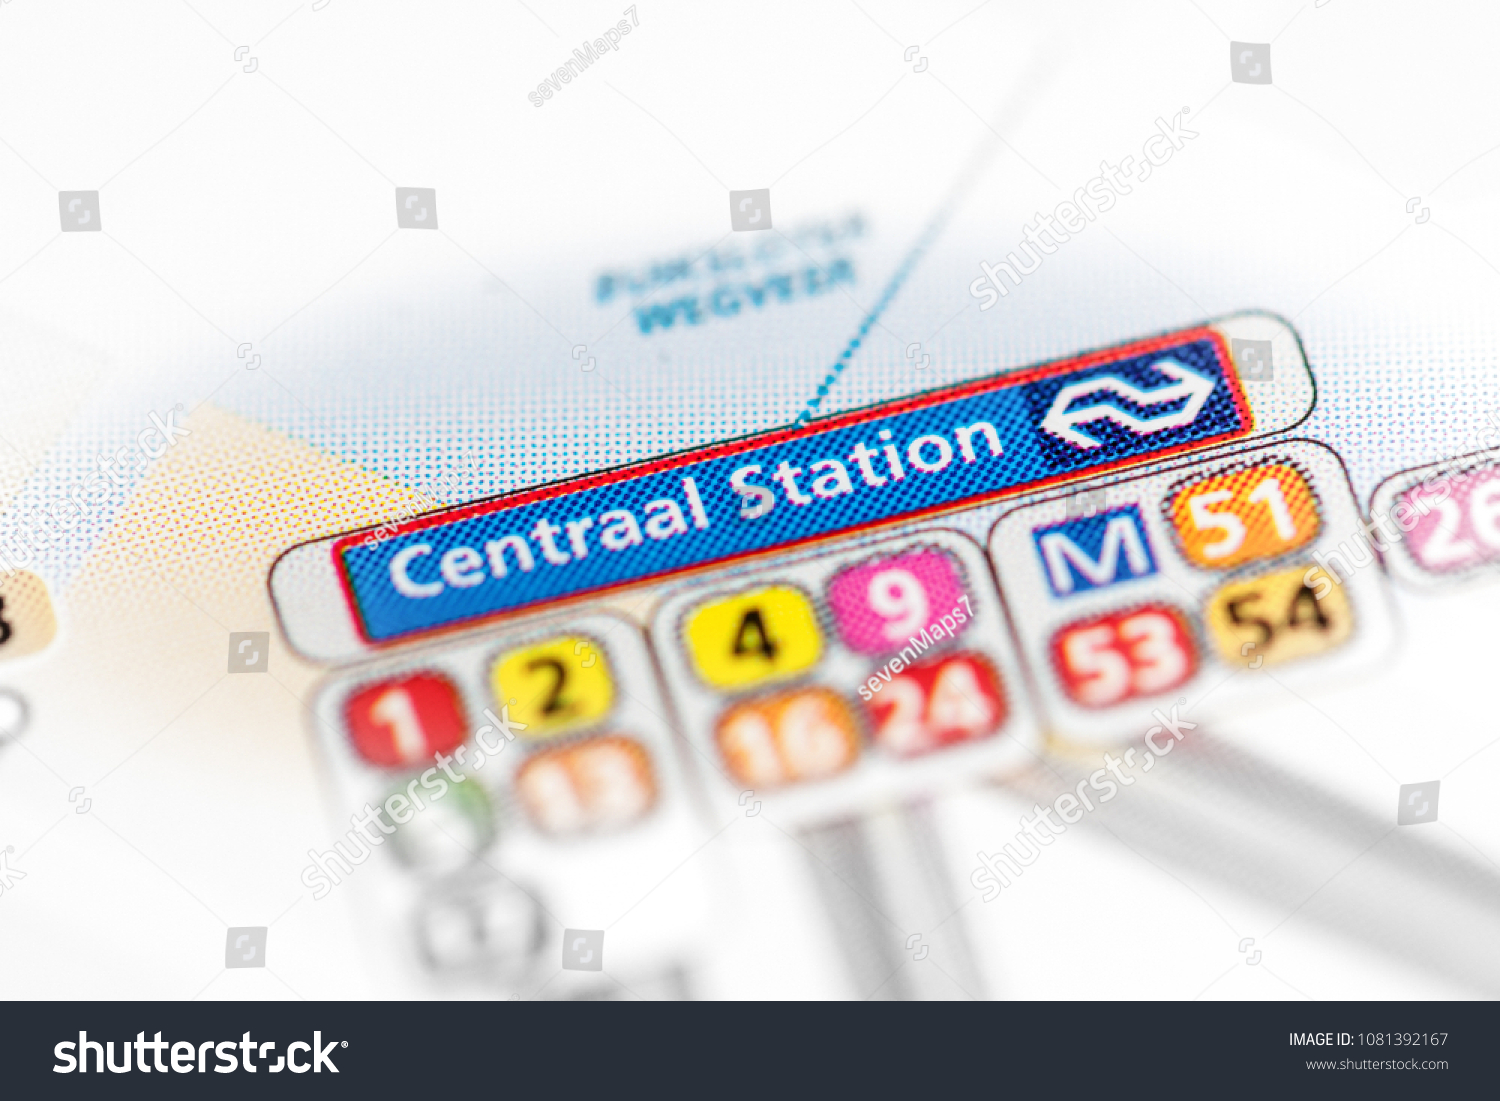 Central Station Amsterdam Metro Map On Stock Photo Edit Now